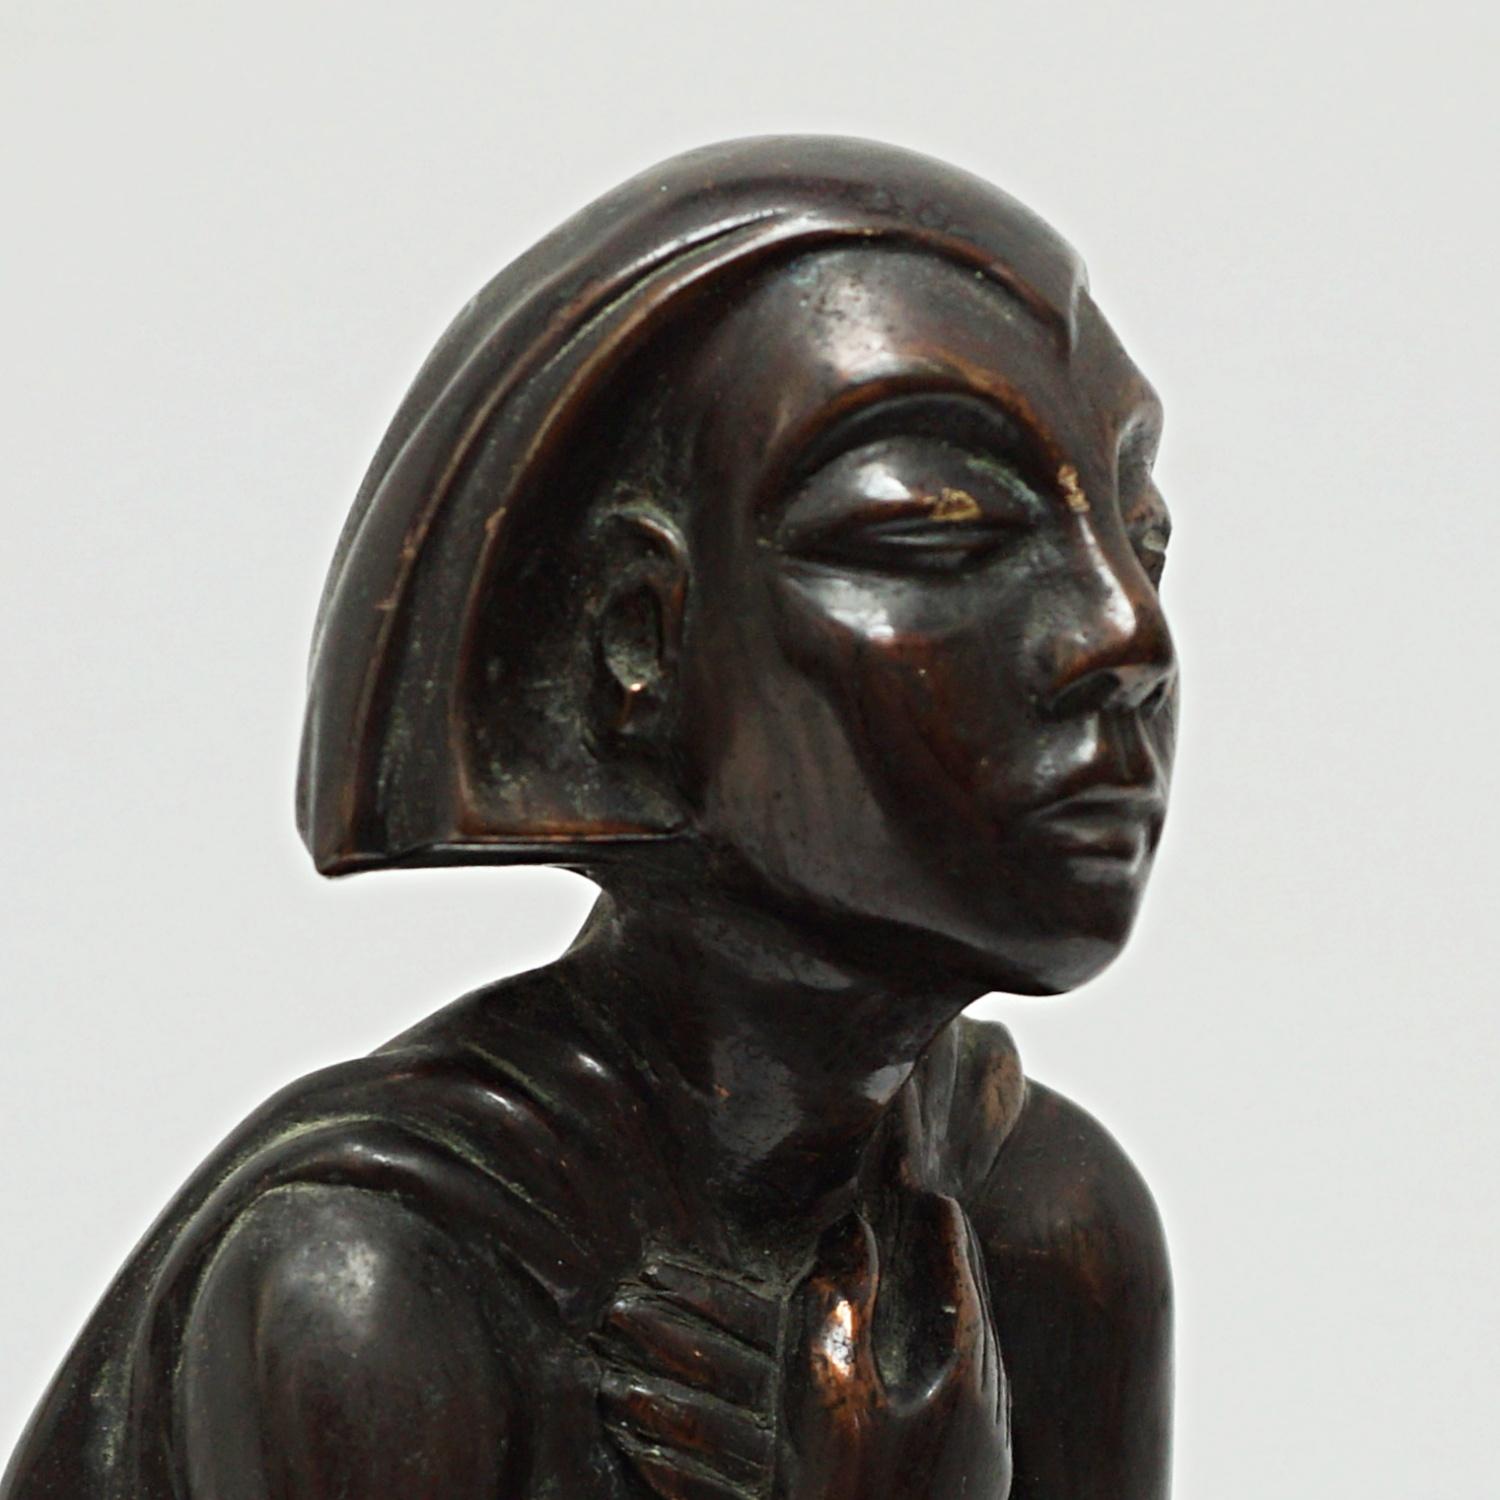 An Art Deco bronze figure of a standing woman clutching her hands to her chest wearing a cloak. Unsigned.

Dimensions: H 38cm W 12cm D 10cm

Origin: English

Date: Circa 1920

Item Number: 2309226.